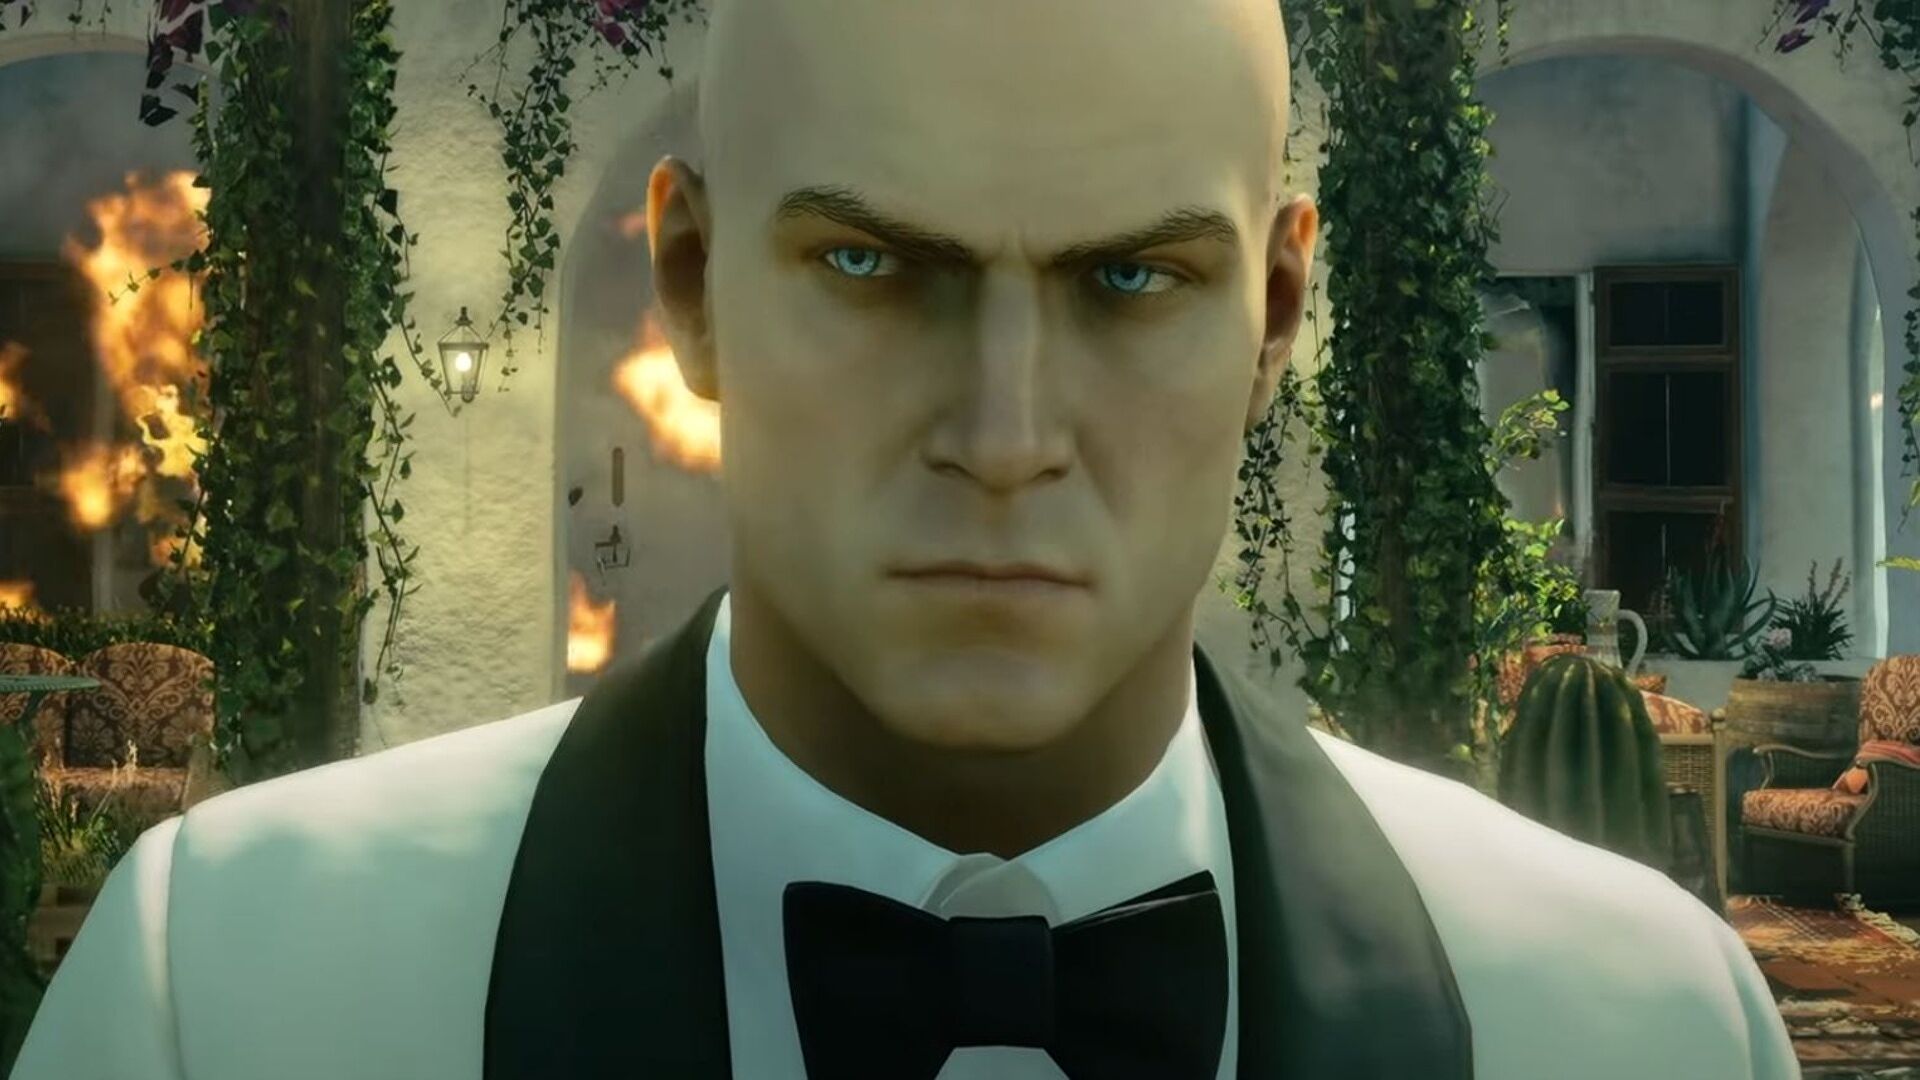 Hitman World Of Assassination is out, combining Hitman 1-3 and adding new roguelike mode